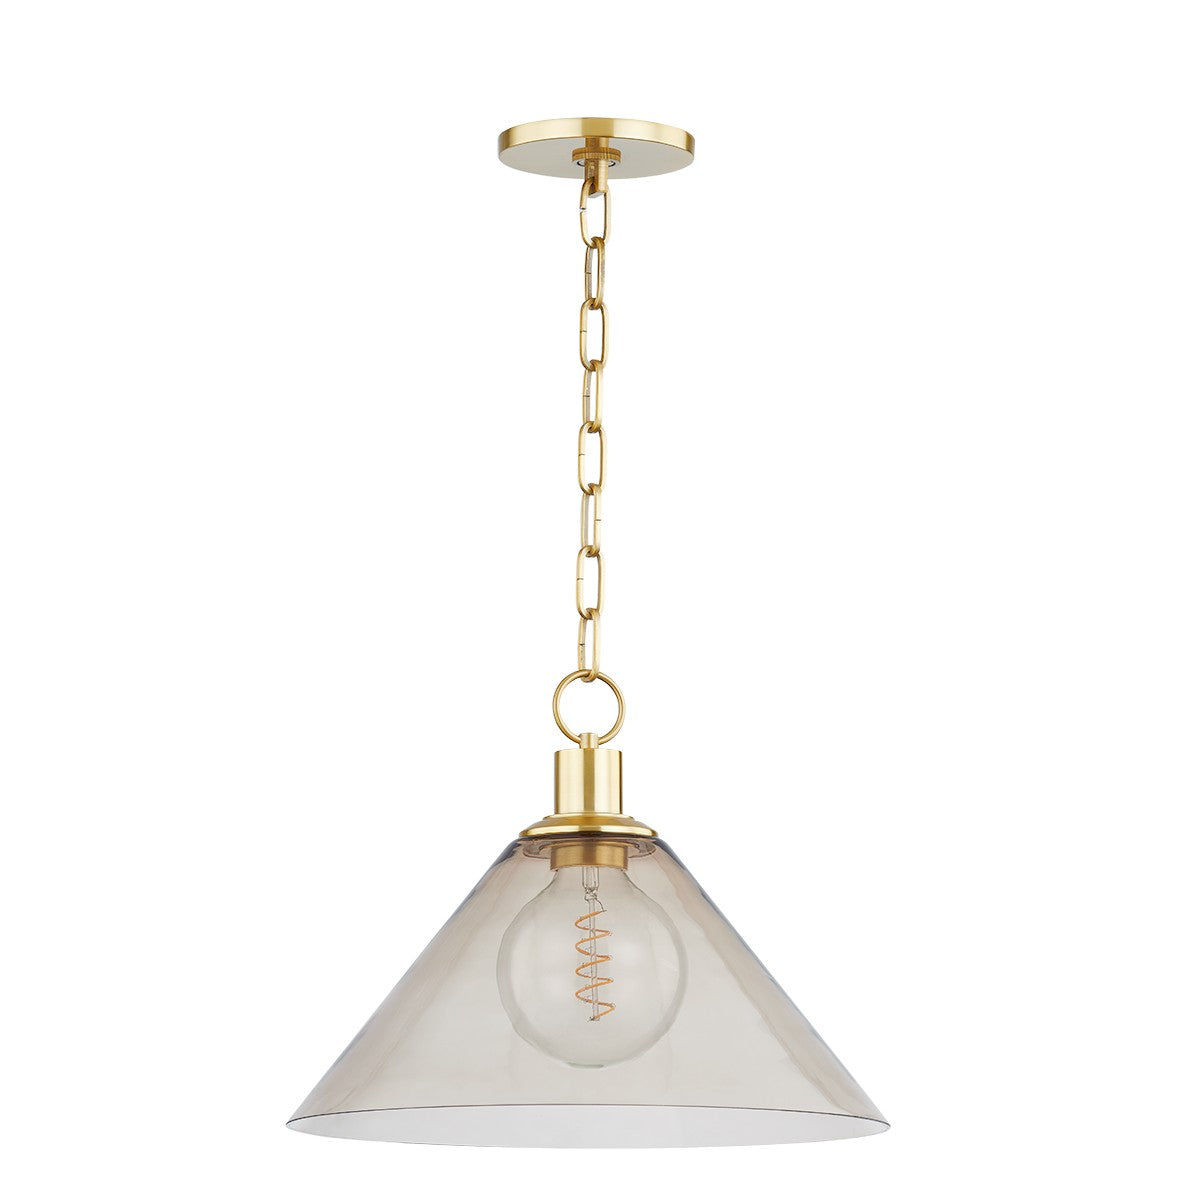 Mitzi - H829701L-AGB - One Light Pendant - Anniebee - Aged Brass